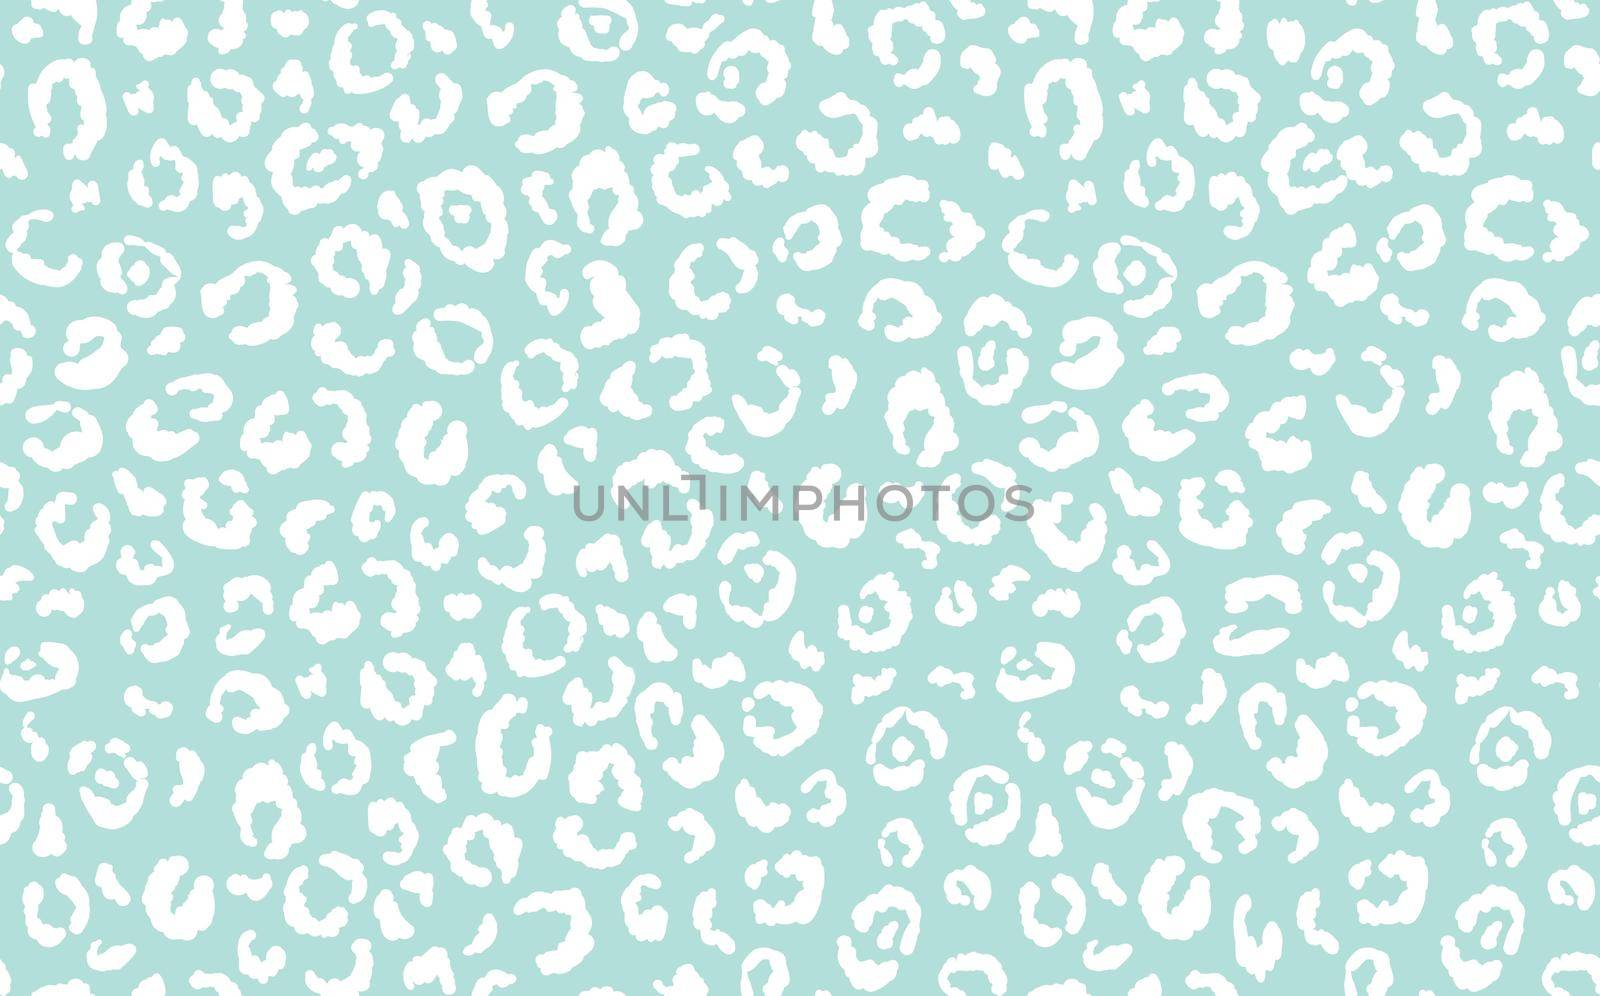 Abstract modern leopard seamless pattern. Animals trendy background. Blue and white decorative vector stock illustration for print, card, postcard, fabric, textile. Modern ornament of stylized skin.